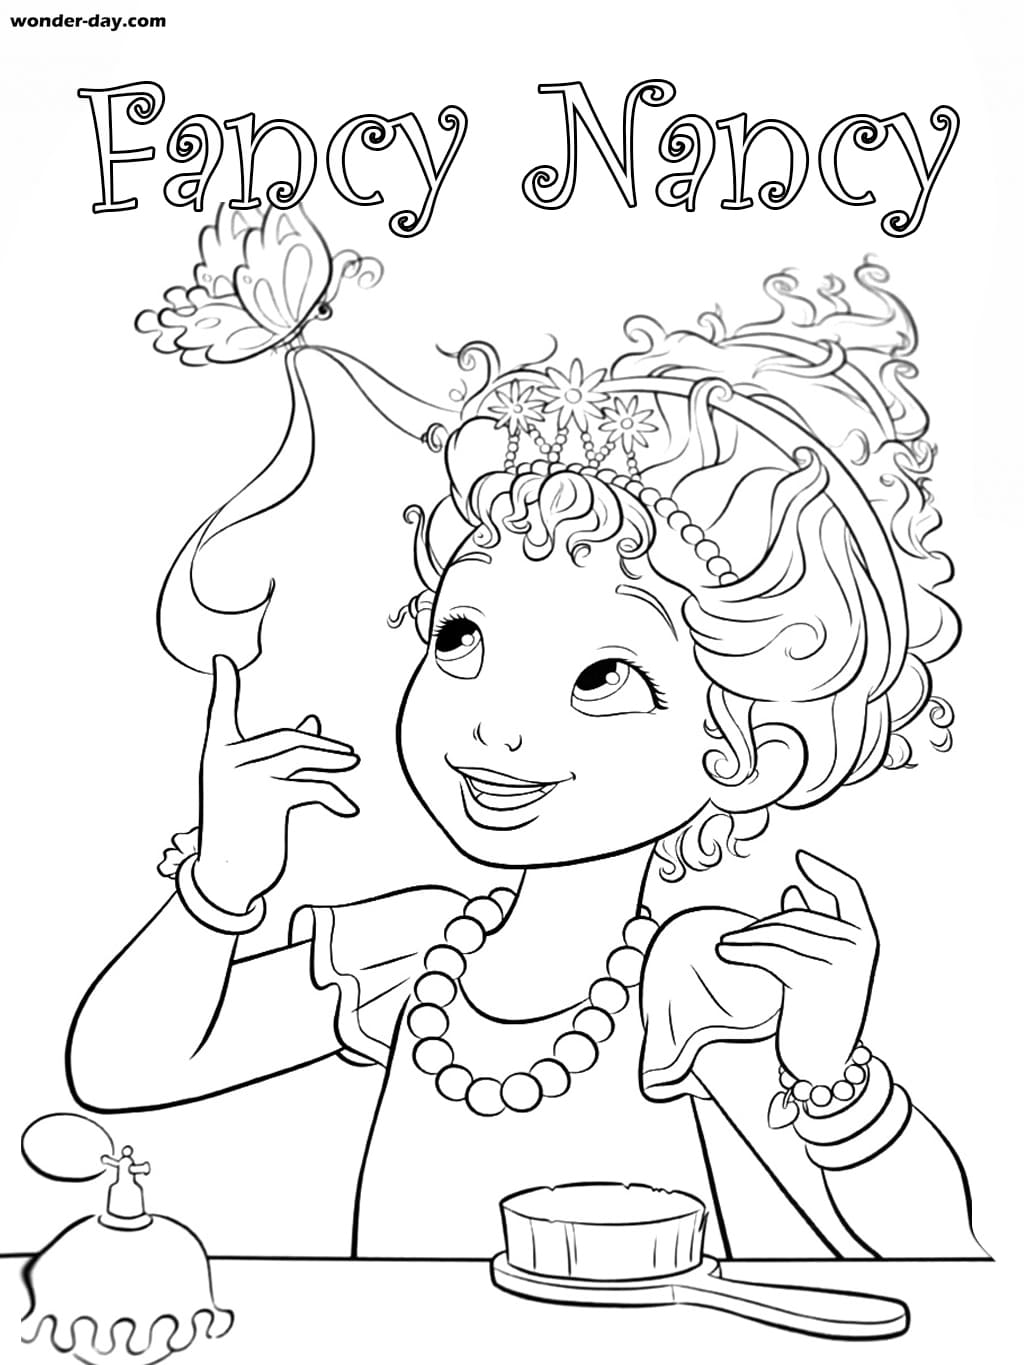 Fancy Nancy Coloring Pages Best Coloring Pages For Girls